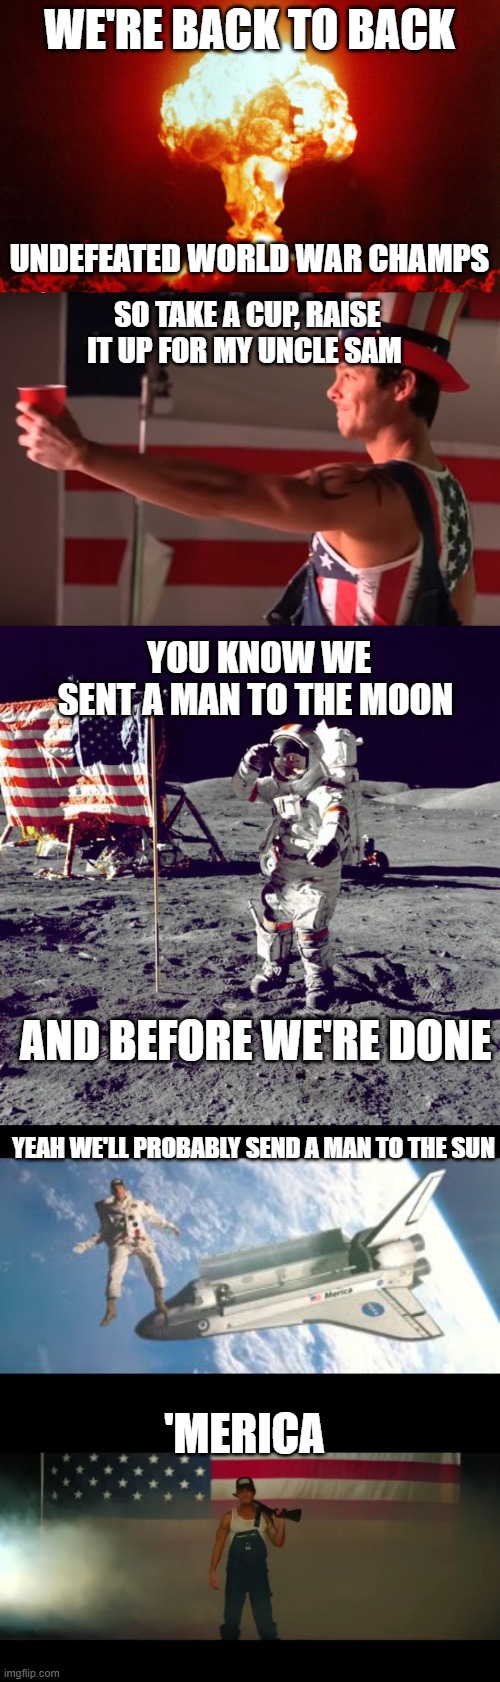 WE'RE BACK TO BACK; UNDEFEATED WORLD WAR CHAMPS; SO TAKE A CUP, RAISE IT UP FOR MY UNCLE SAM; YOU KNOW WE SENT A MAN TO THE MOON; AND BEFORE WE'RE DONE; YEAH WE'LL PROBABLY SEND A MAN TO THE SUN; 'MERICA | image tagged in neil armstrong,hiroshima | made w/ Imgflip meme maker